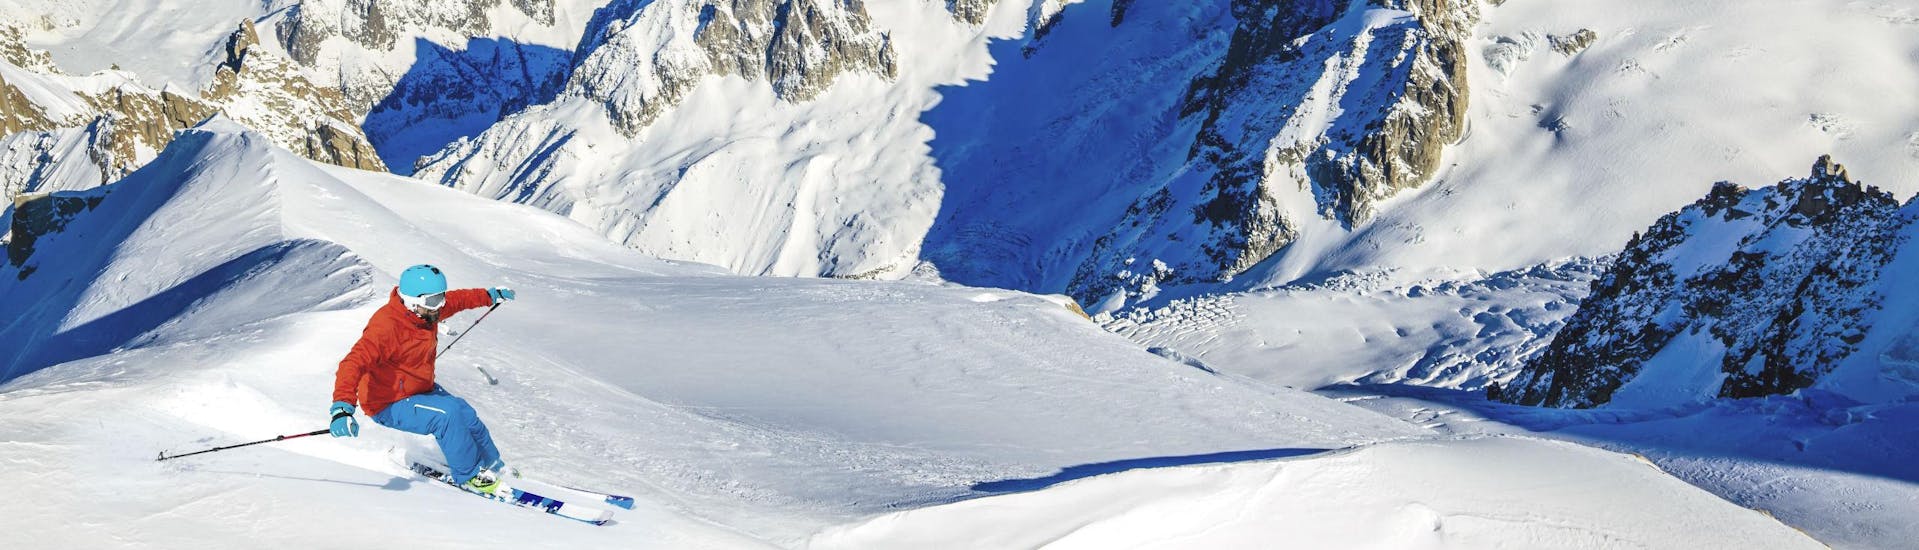 A skier is skiing through fresh powder snow on one of the slopes in Chamonix - Mont Blanc in Haute-Savoie, where local ski schools offer a variety of ski lessons.